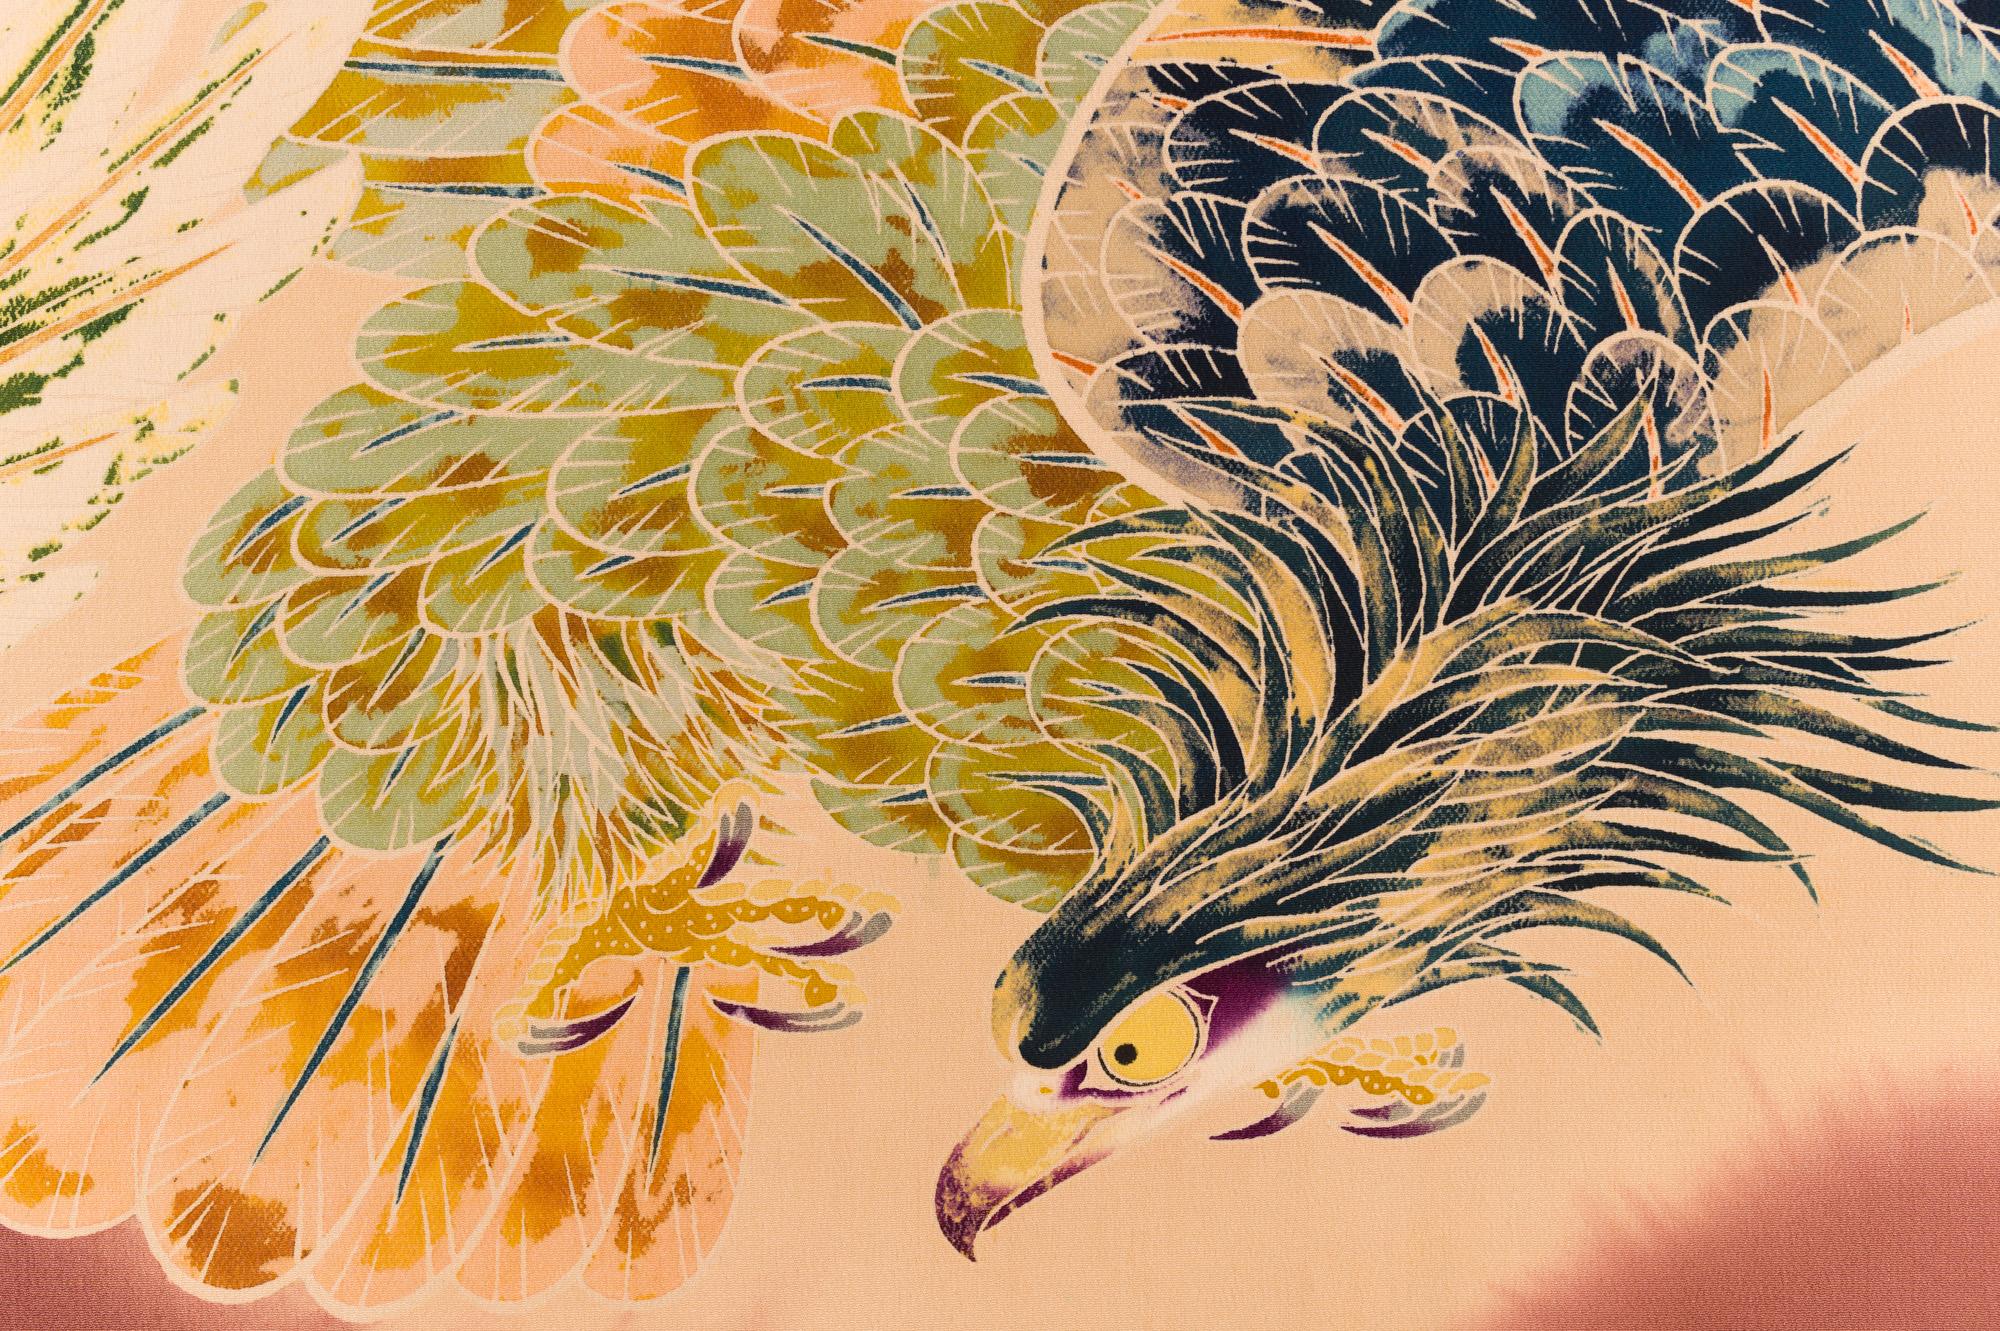 Japanese two panel screen: Falcons in Flight. Showa period (1926-1989) vibrant painting on silk of eagles hunting over turbulent water. The painting on this screen was made using a dying process called somemono, a traditional type of resist dying